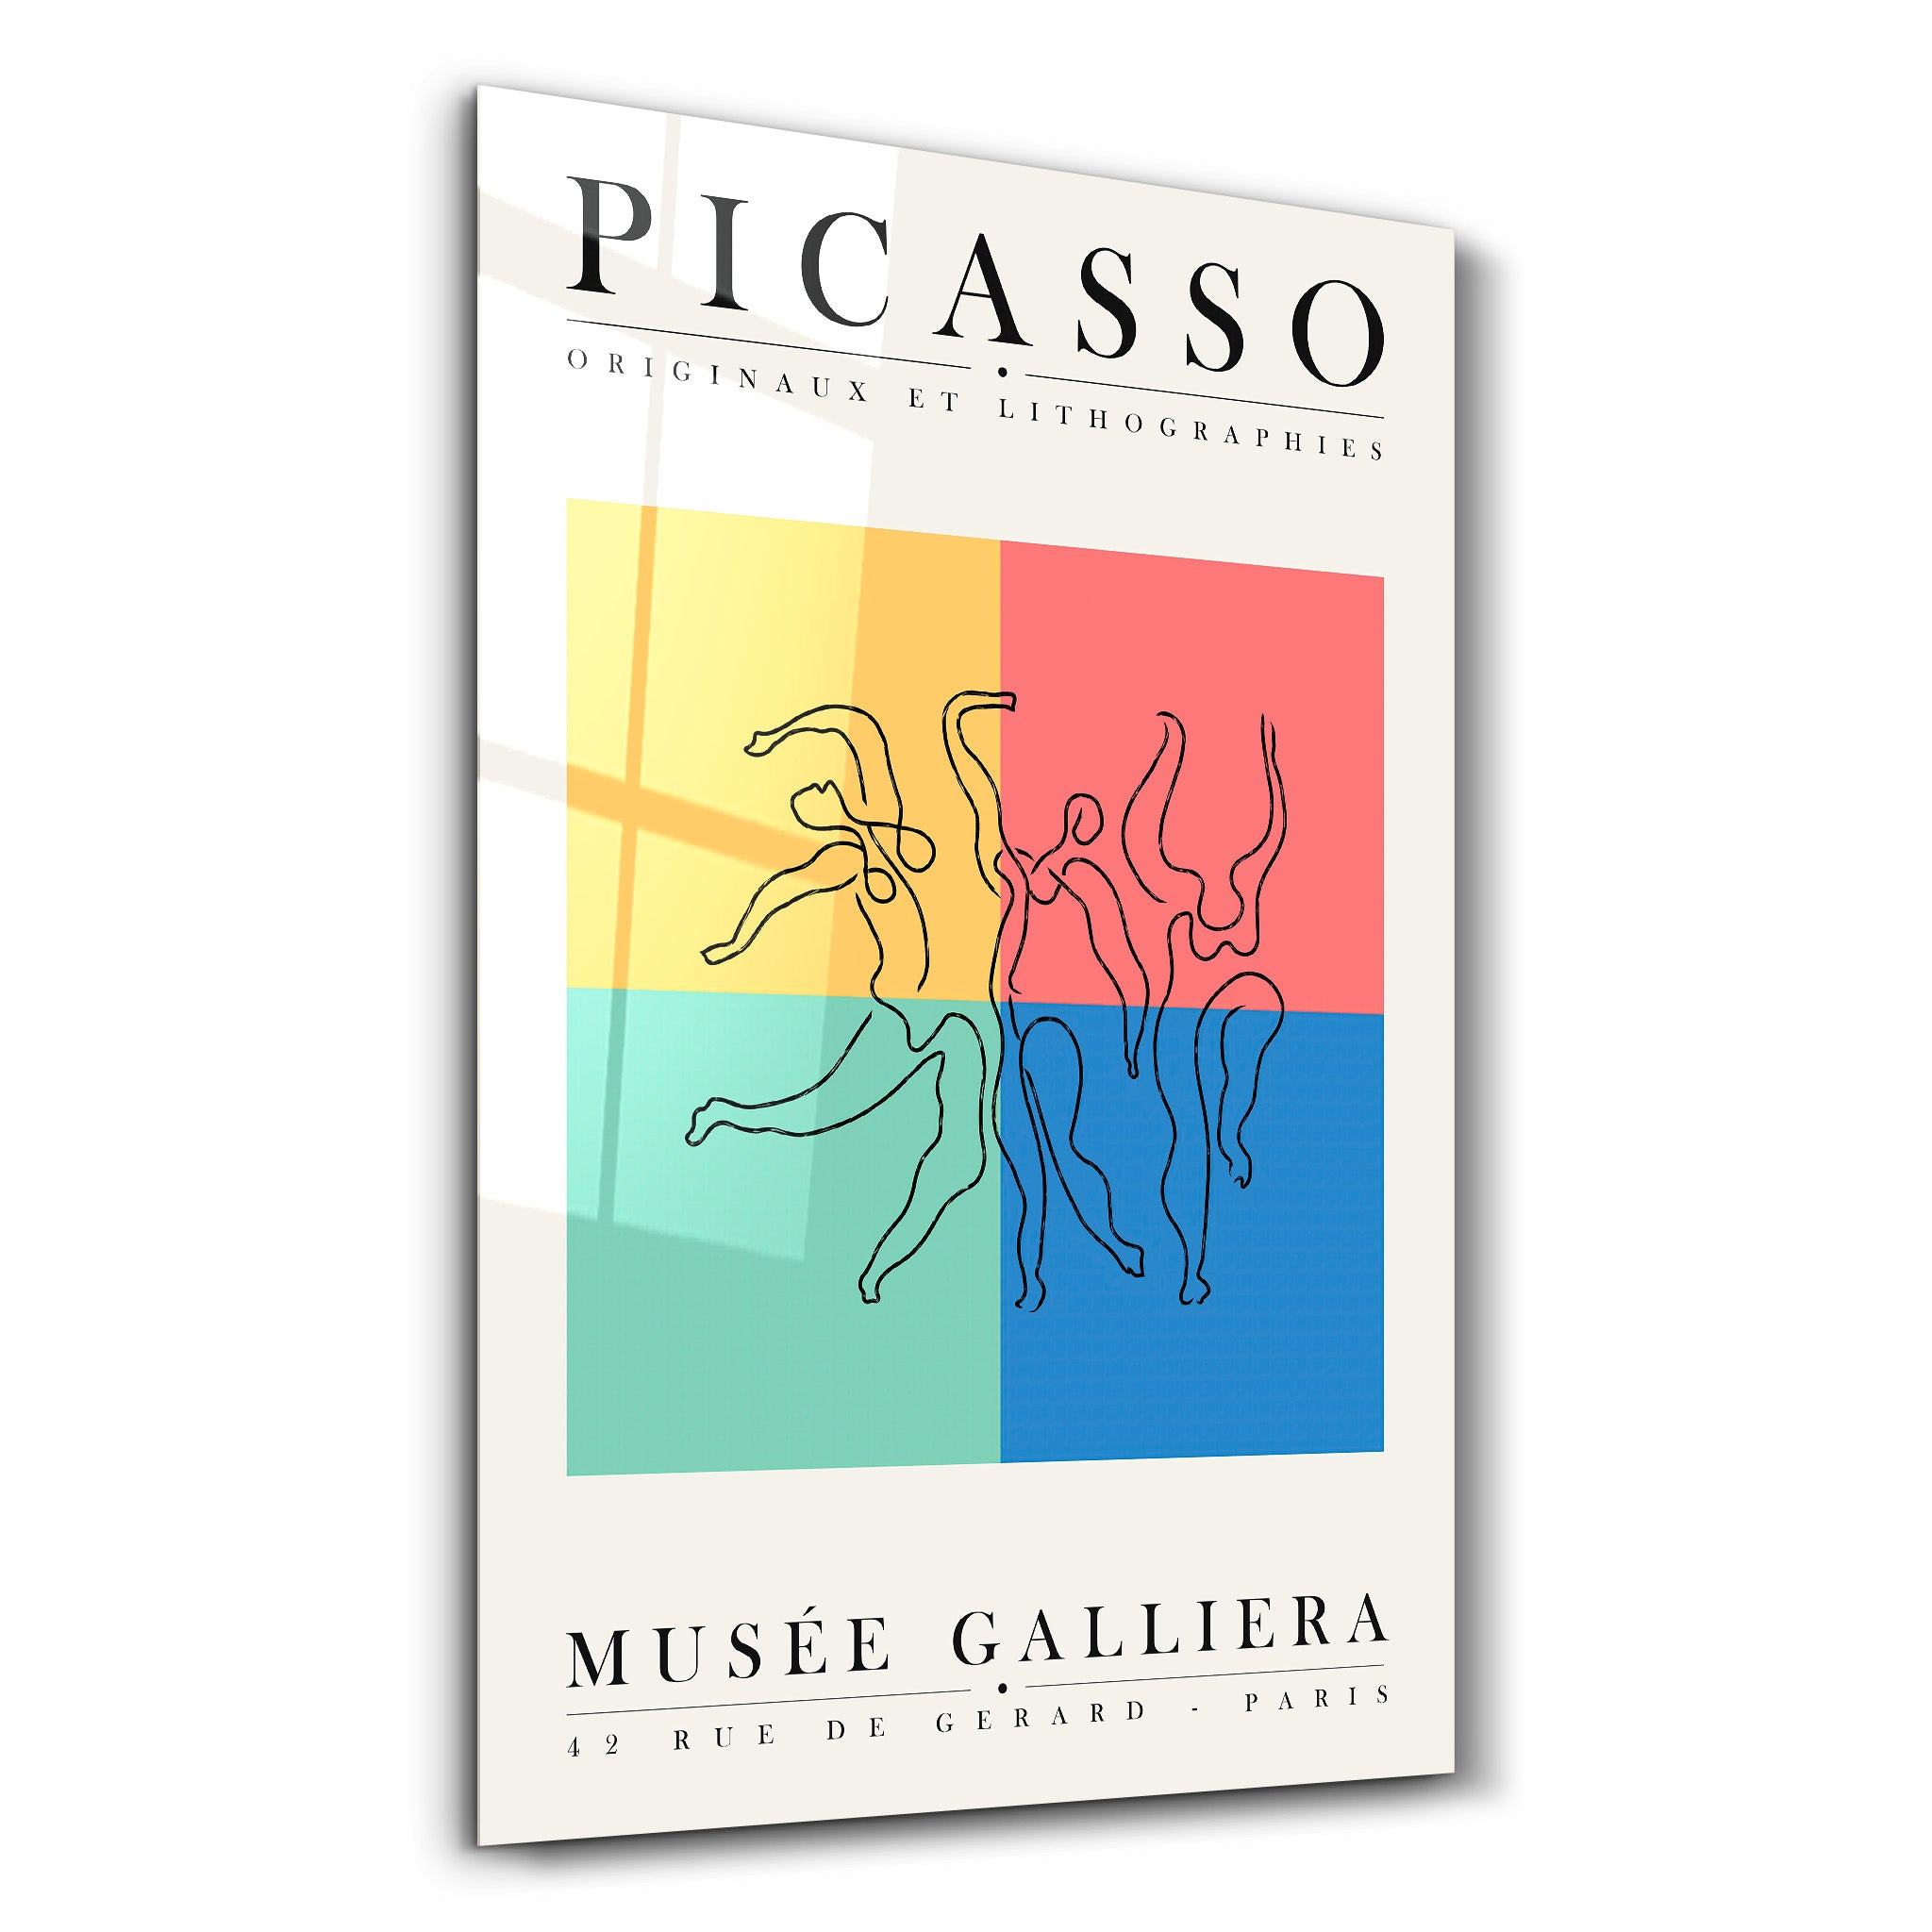 ・"Pablo Picasso - Originaux Et Lithographies"・Gallery Print Collection Glass Wall Art - ArtDesigna Glass Printing Wall Art